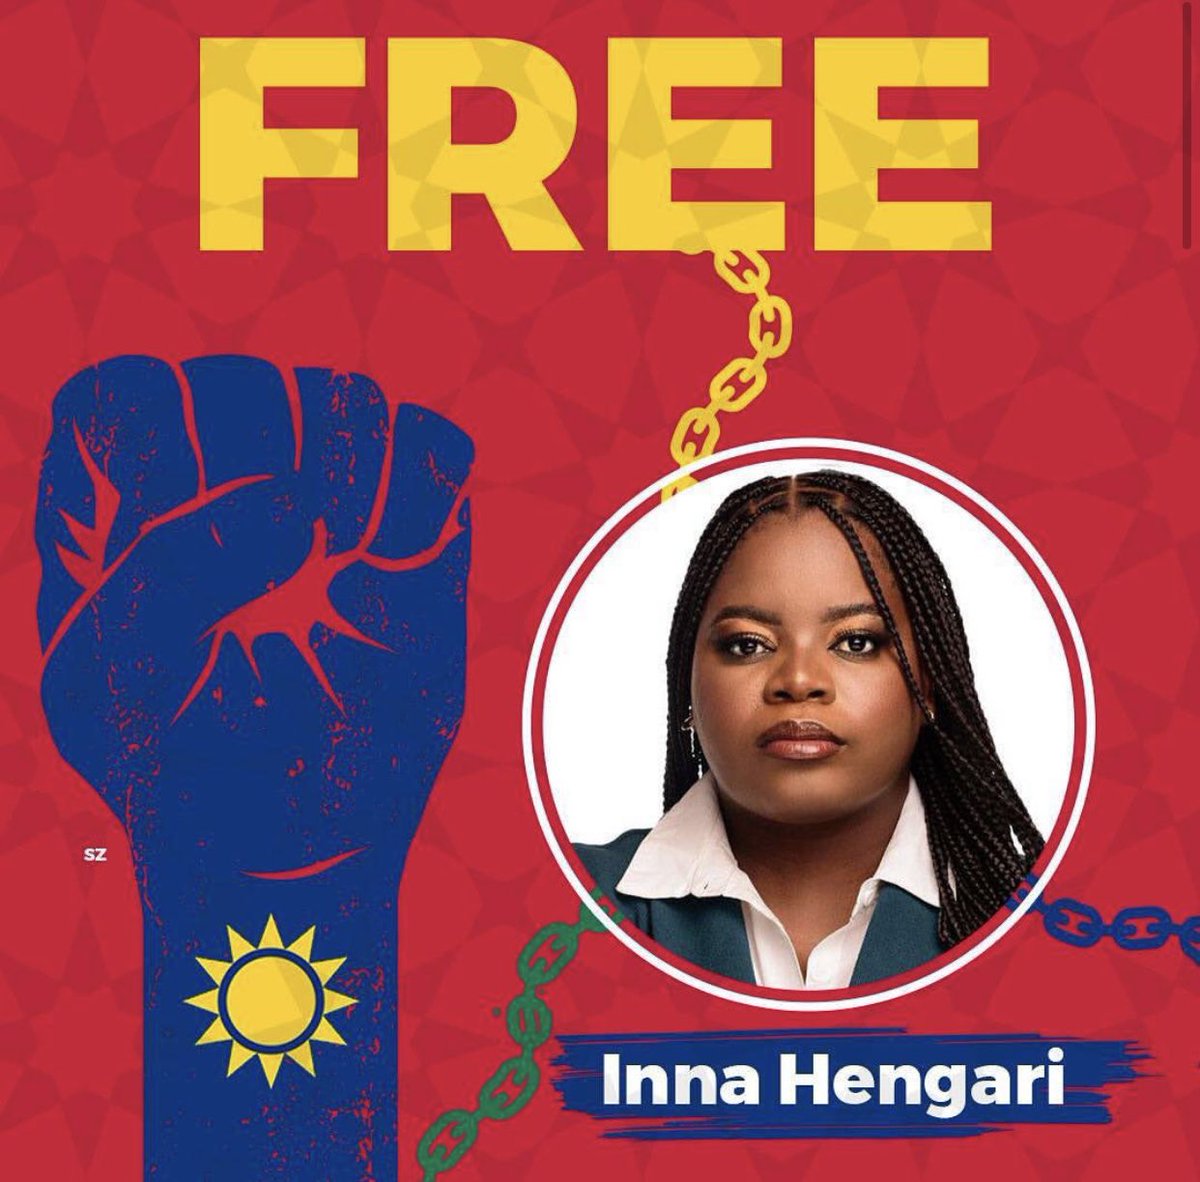 #FreeInna 
Hon MP @Inna_Hengari of Namibia was arrested for demonstrating against Unemployment